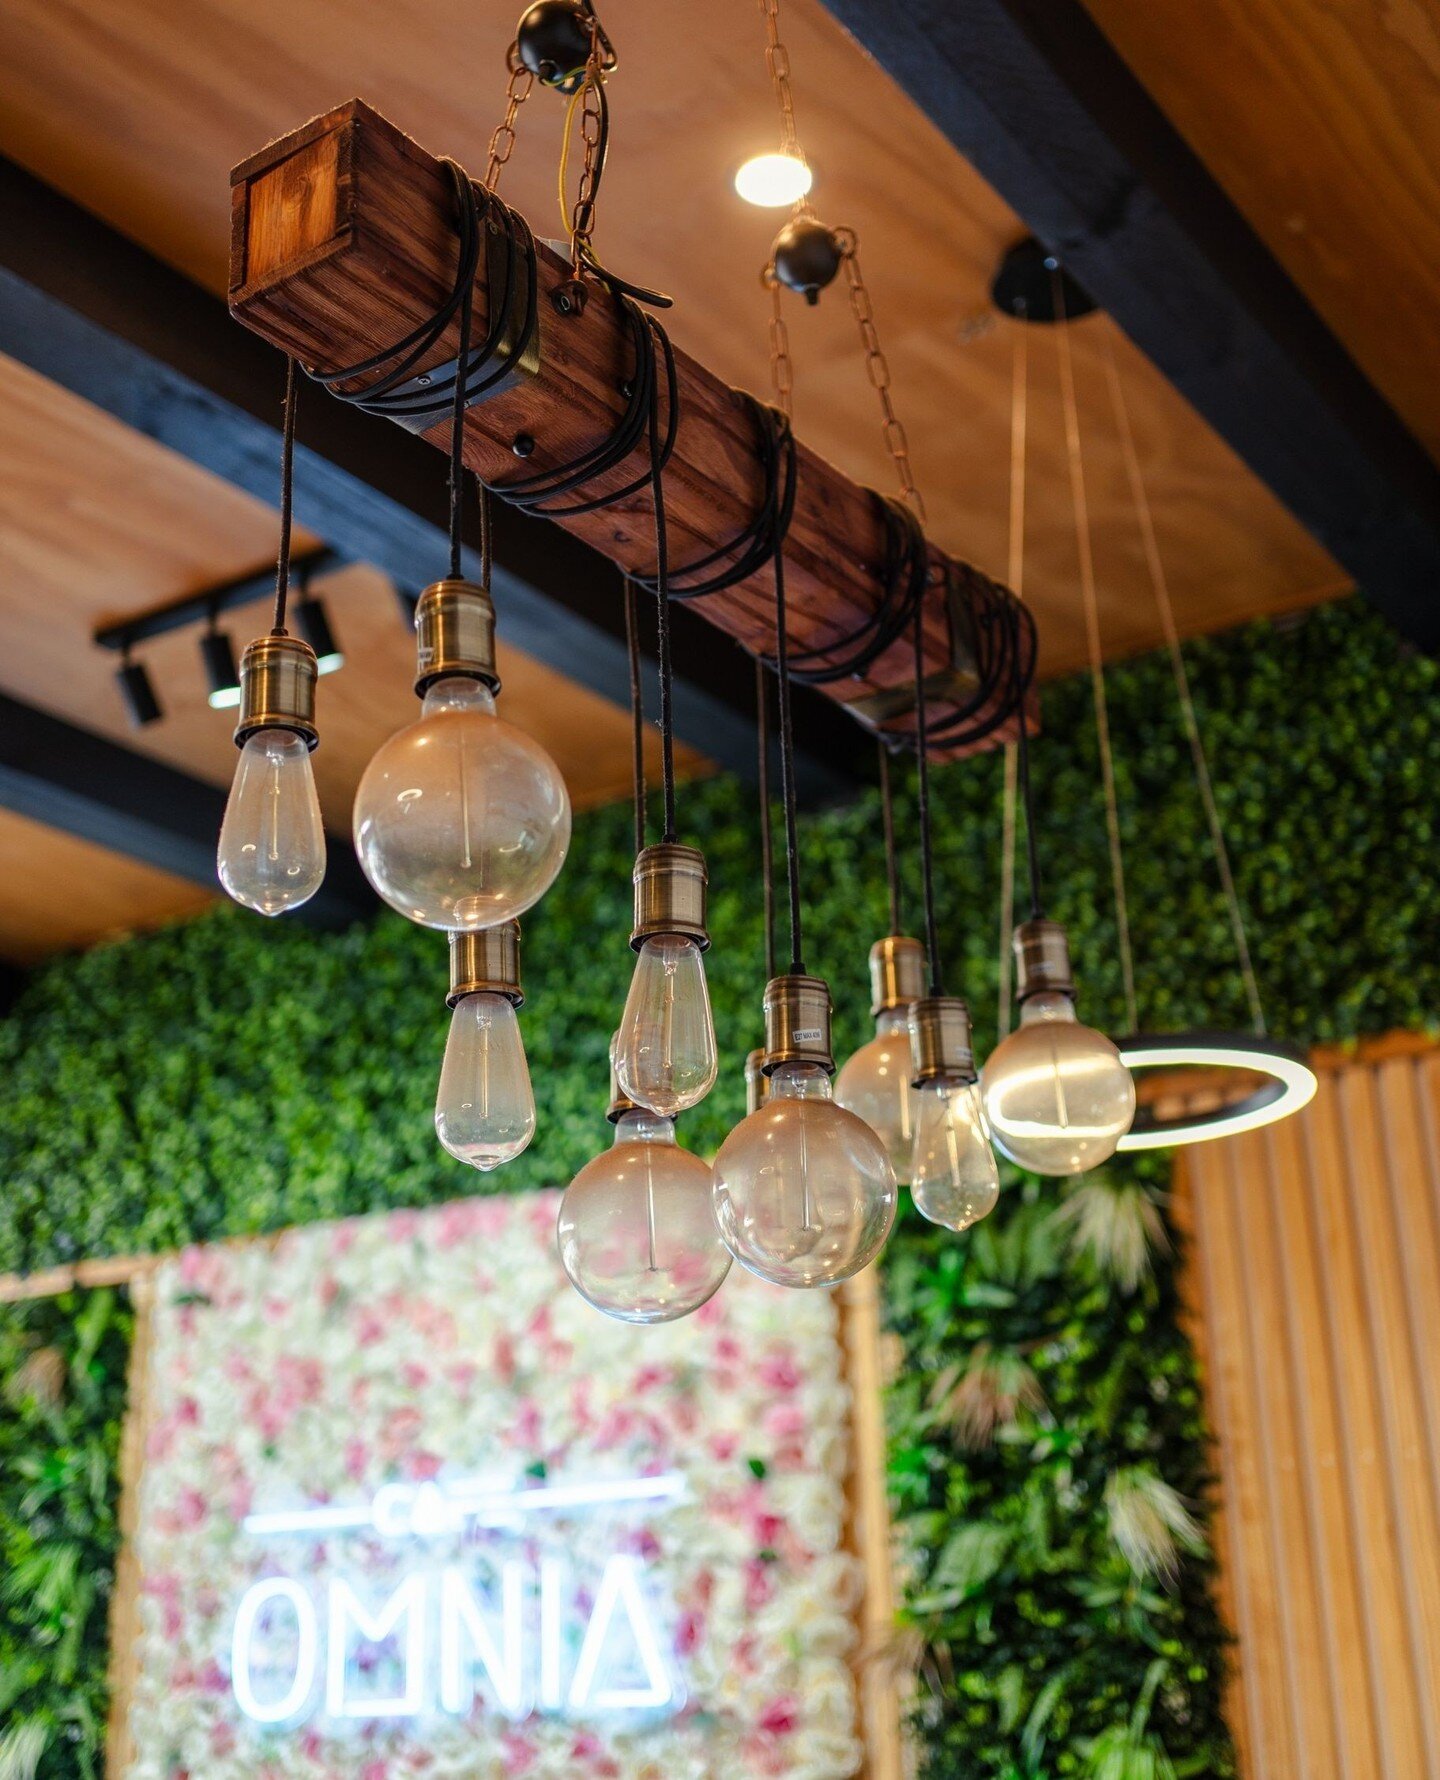 Every detail, like these hanging lightbulbs, adds a touch of charm to your coffee and brunch experience. ☕💡 Beyond delightful flavours, we curate a cosy haven where every visit feels like a warm embrace. Join us for not just a meal, but a comforting